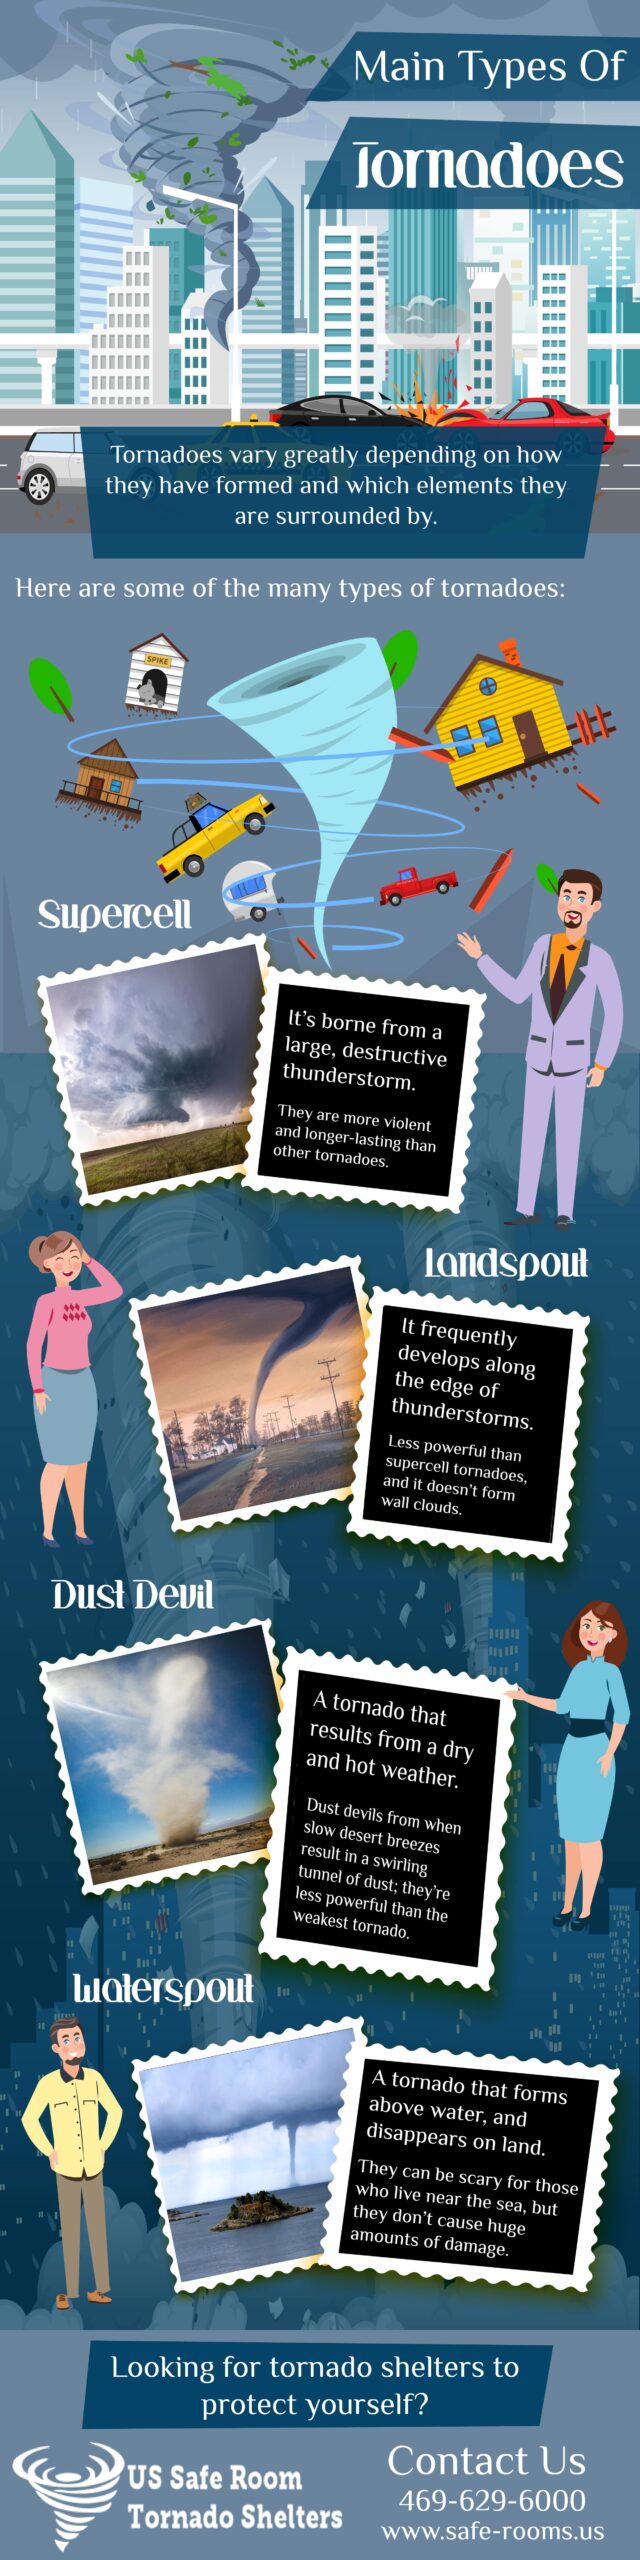 types of tornadoes